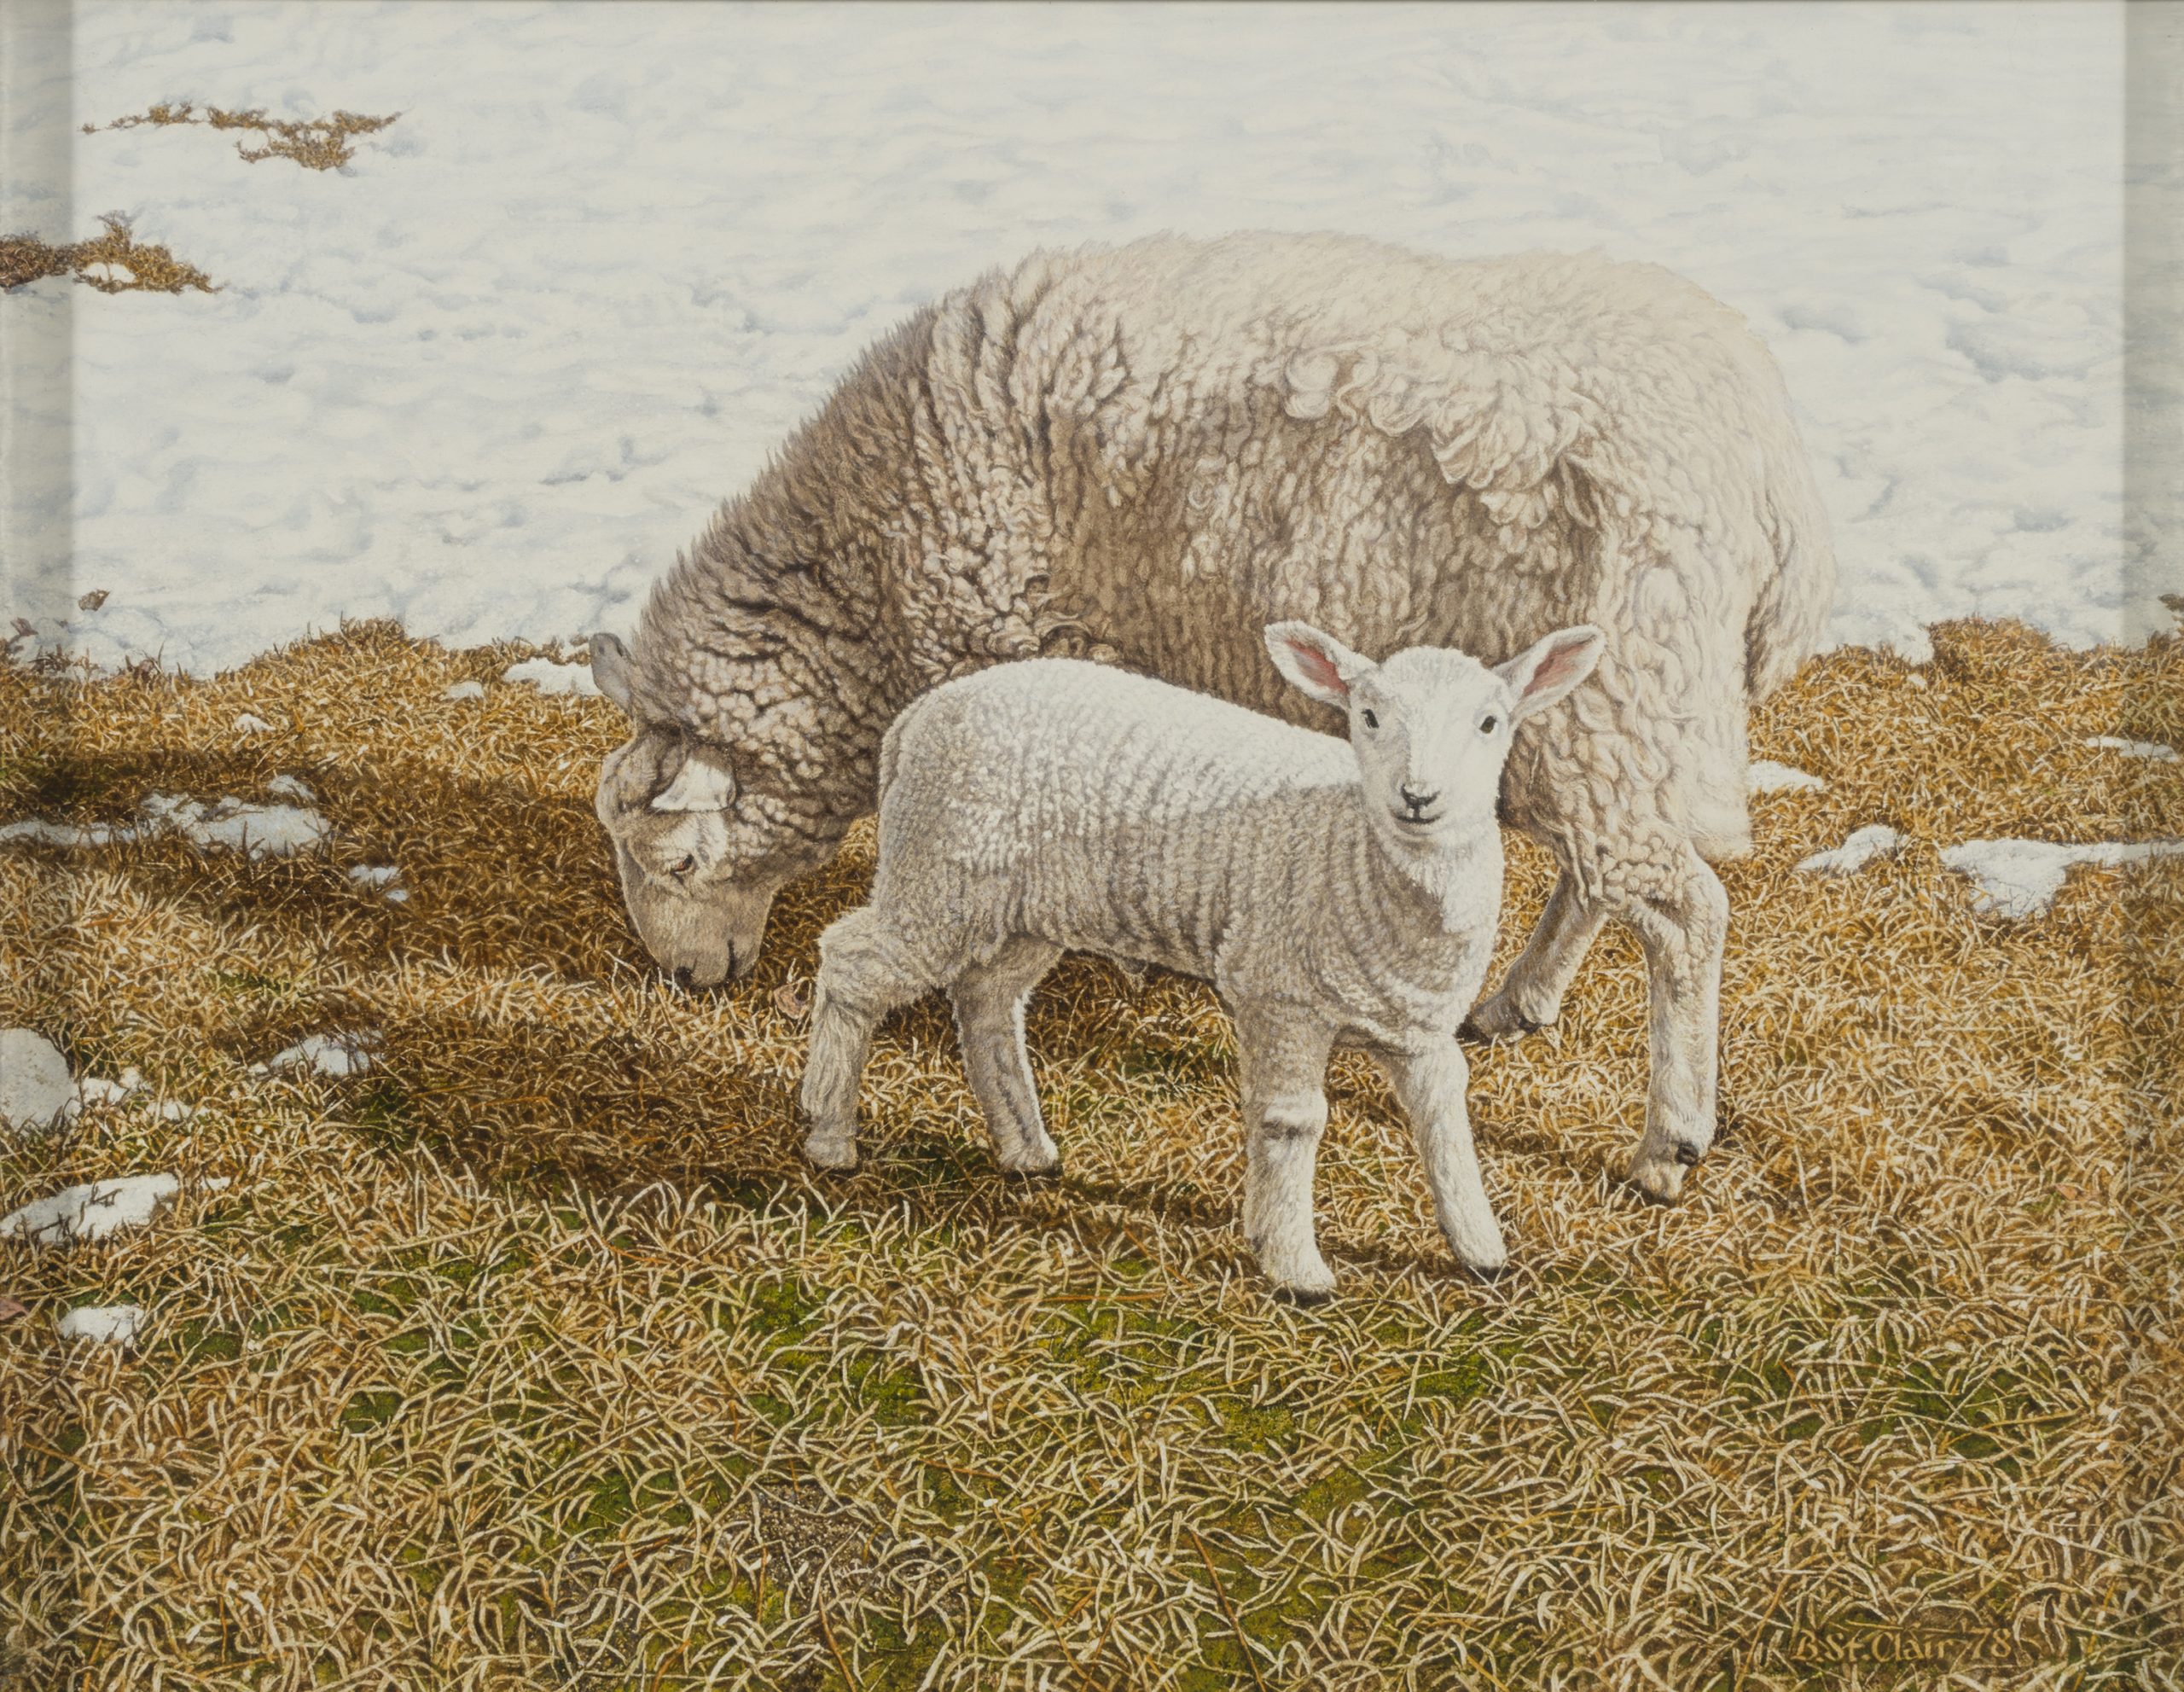 a painting of a sheep and a lamb in a grassy field partially covered in snow